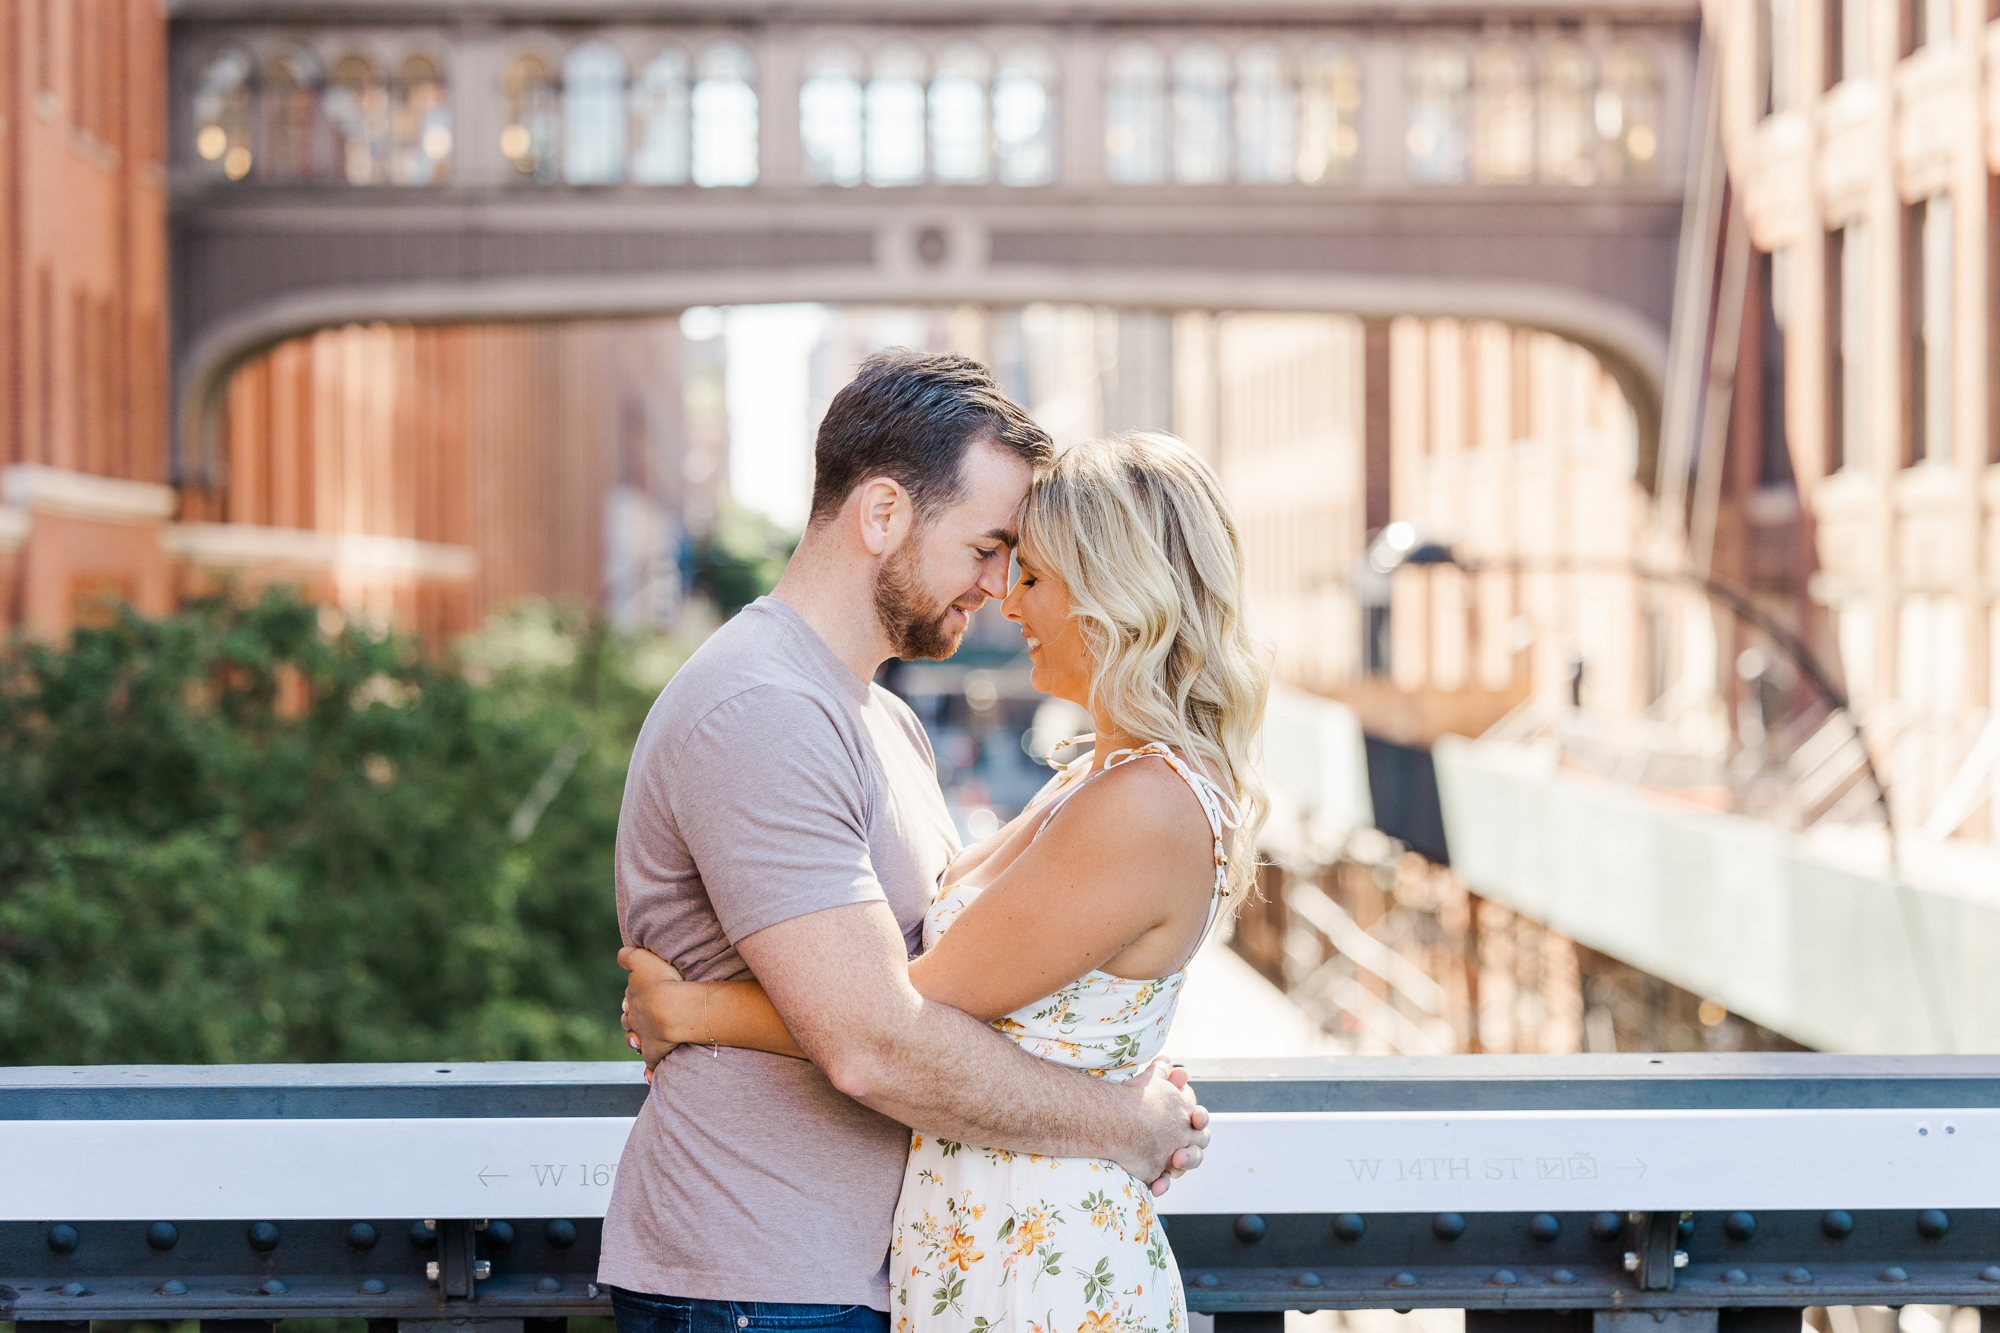 Striking Summer Engagement Shoot on the High Line